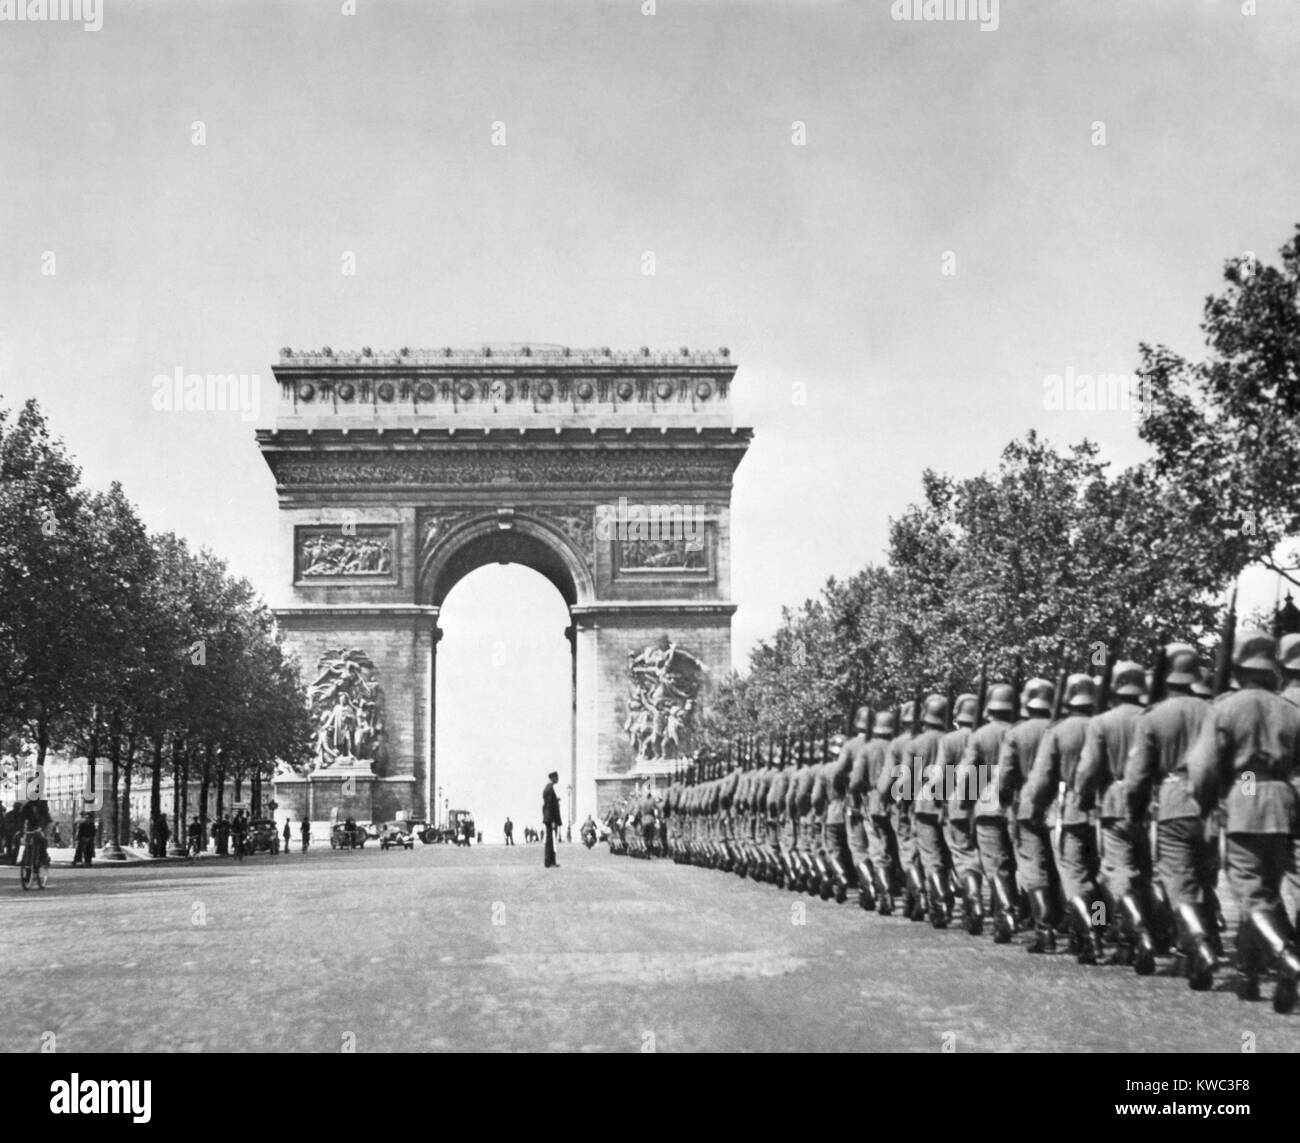 German troops marching near Arc of Triumph, during the Nazi occupation of Paris. Summer 1940, World War 2 (BSLOC 2015 13 79) Stock Photo